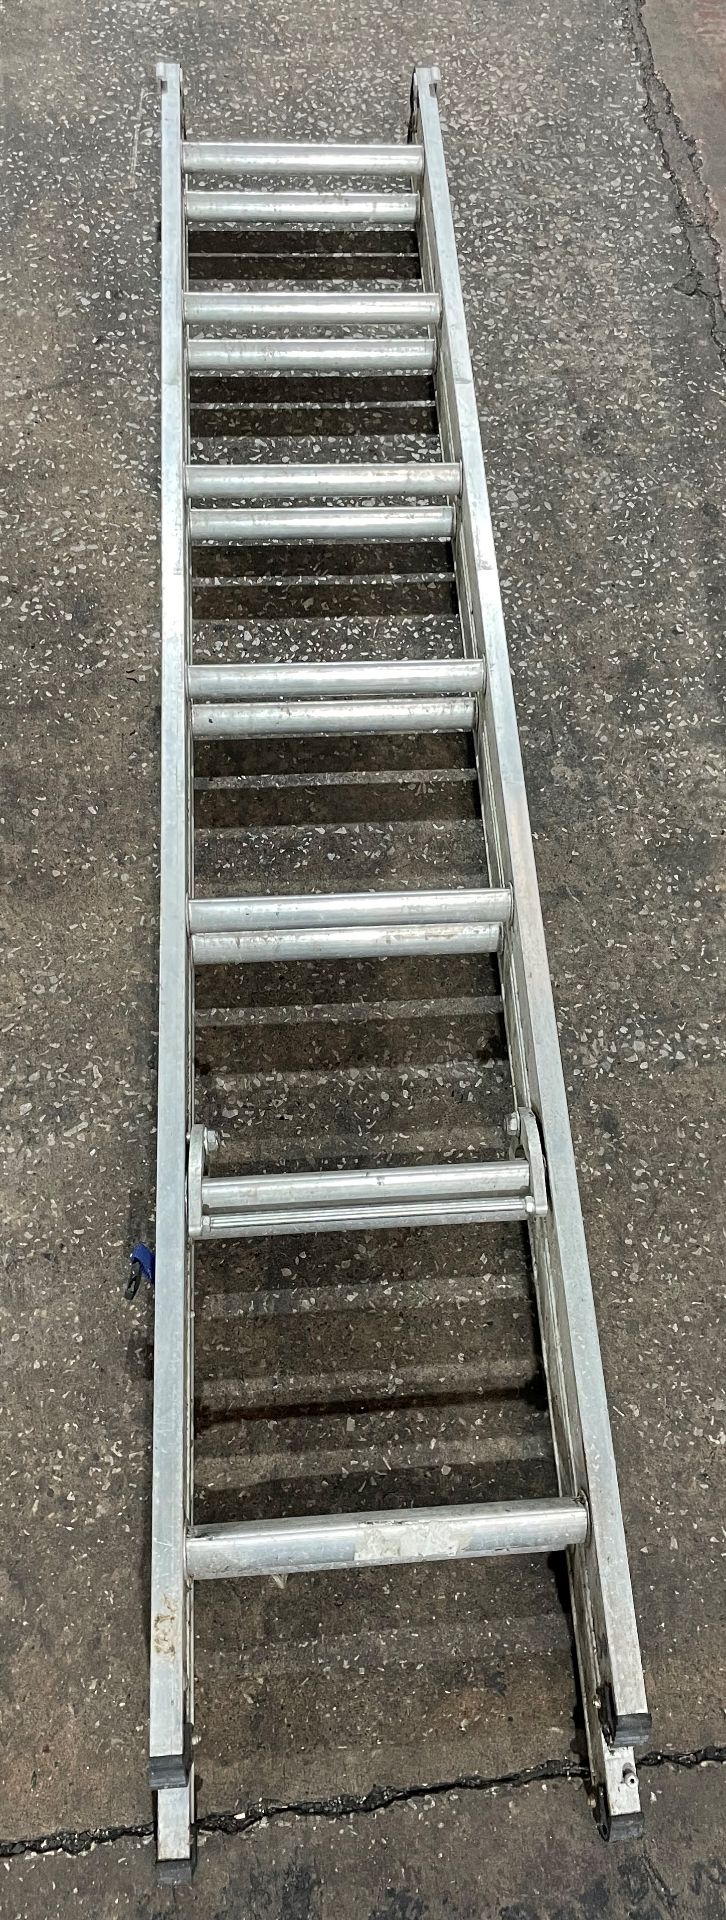 A MacAllister 6 rise Alloy Stepladder with Alloy 14 rise Double Extension Ladder. - Image 2 of 2